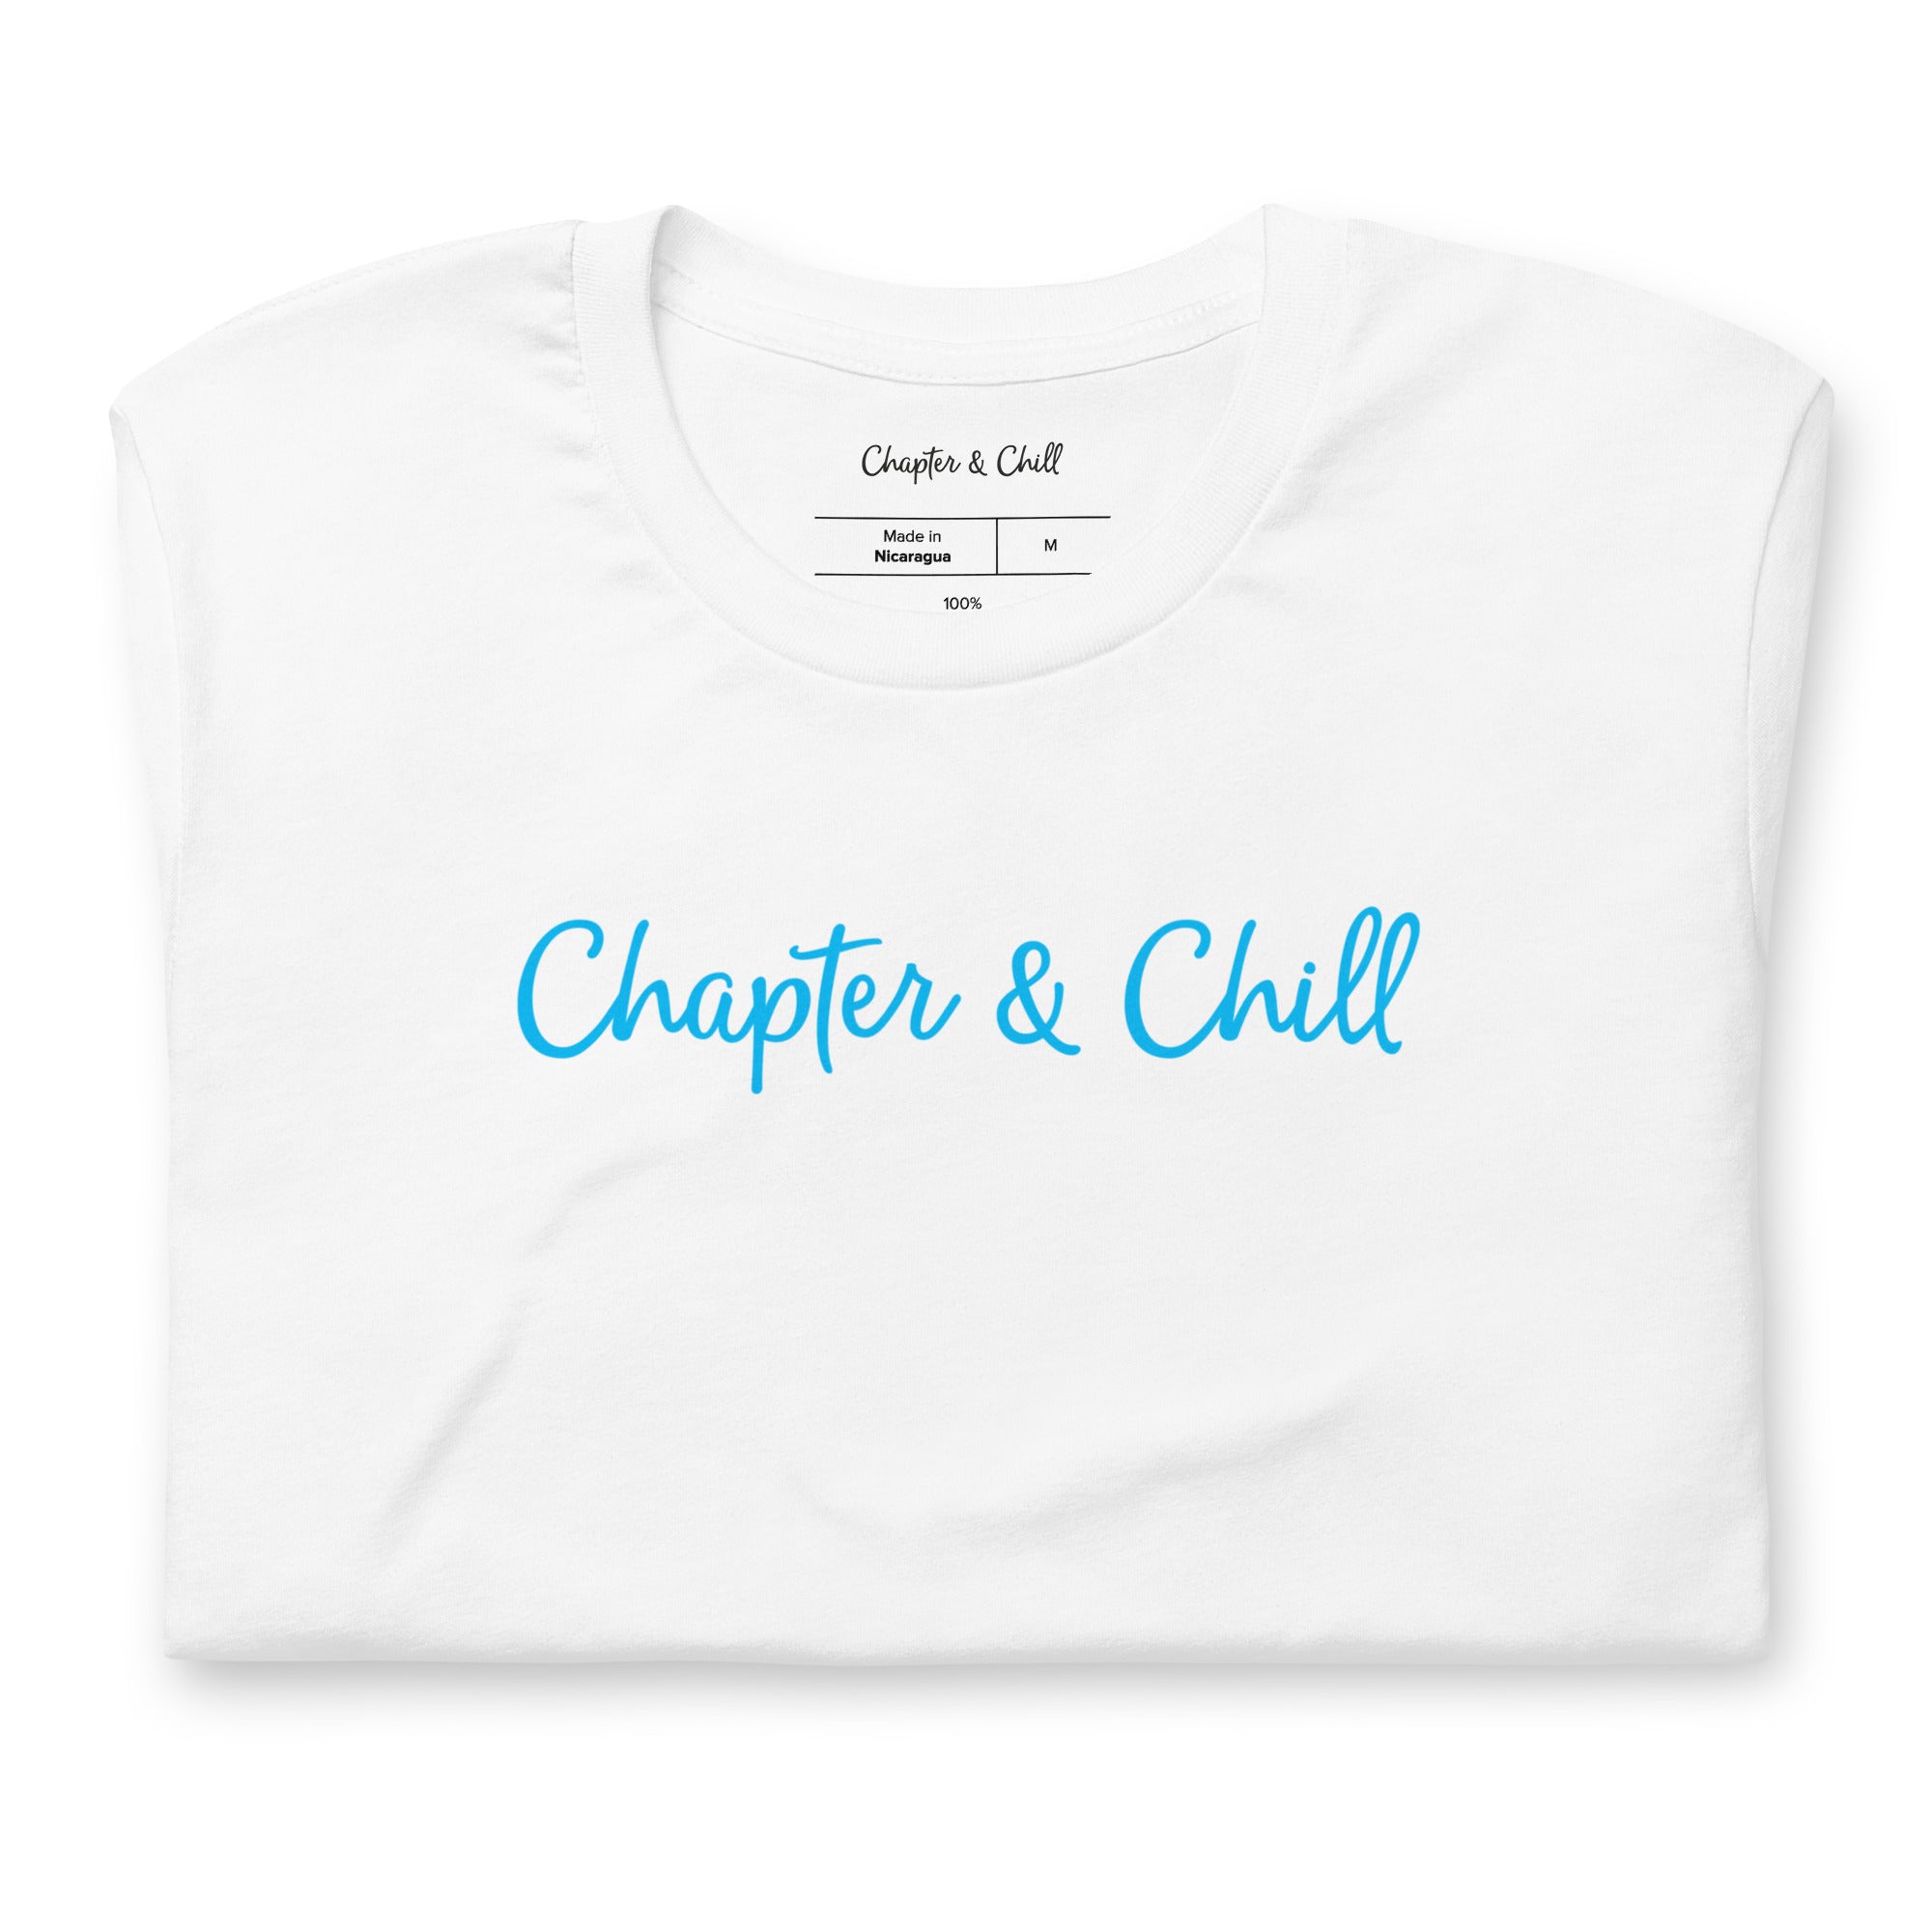 Chapter & Chill